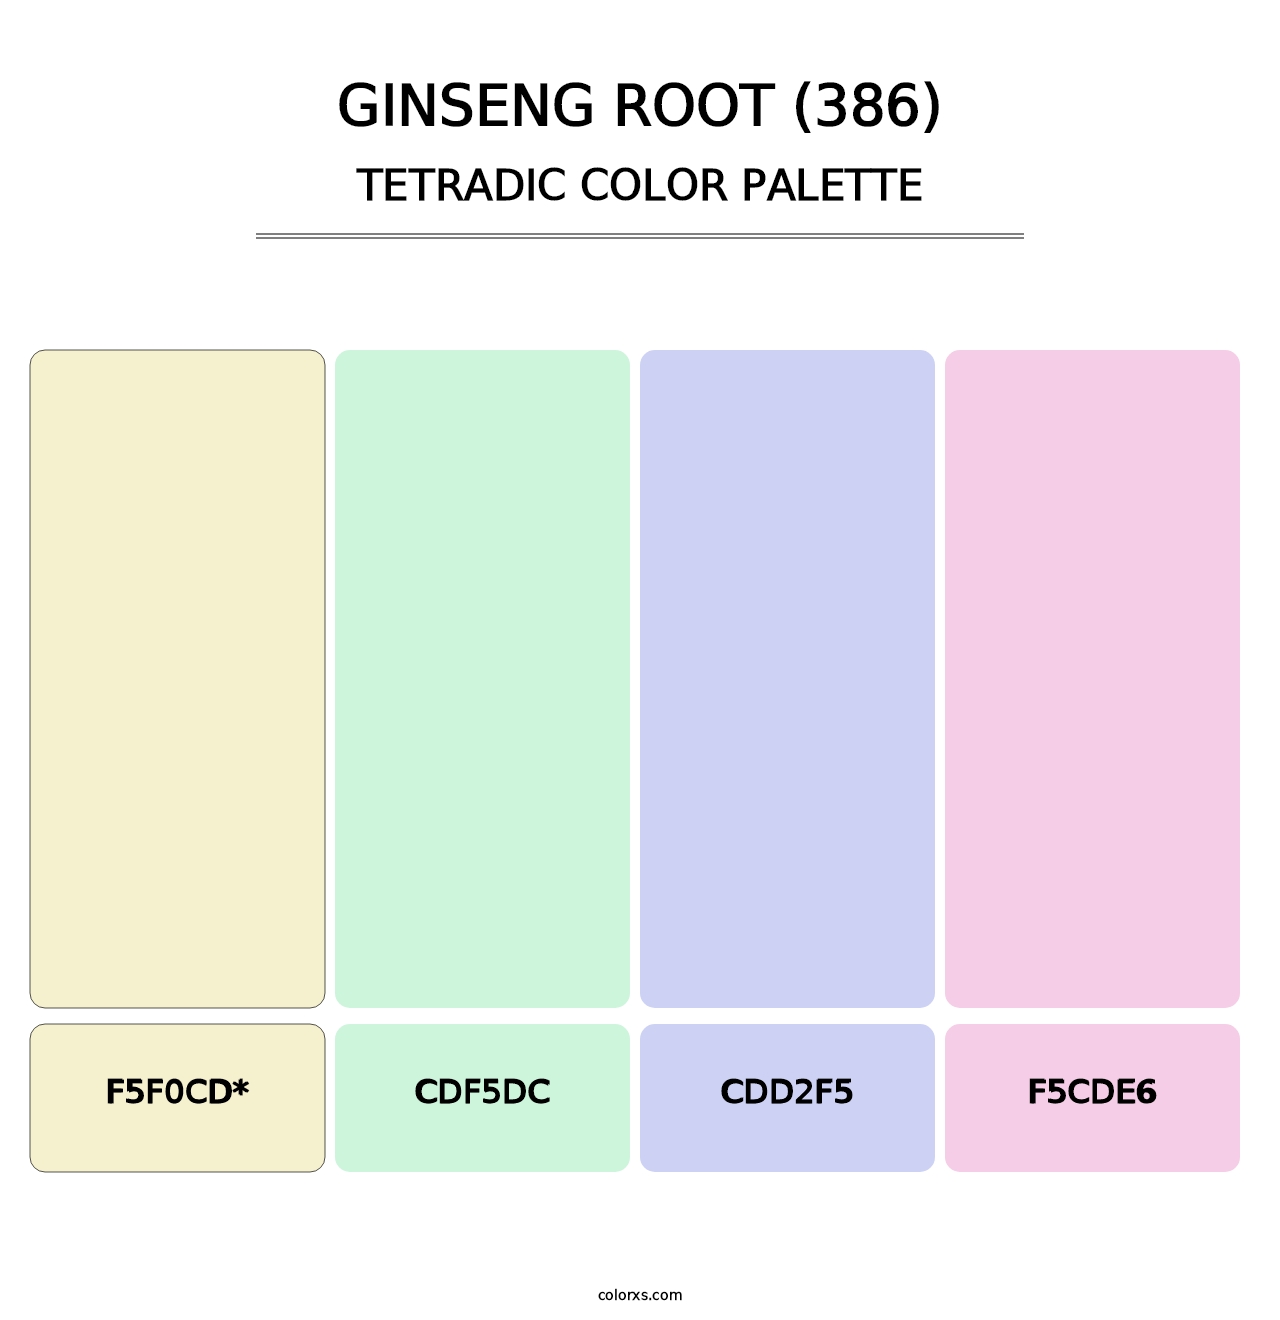 Ginseng Root (386) - Tetradic Color Palette